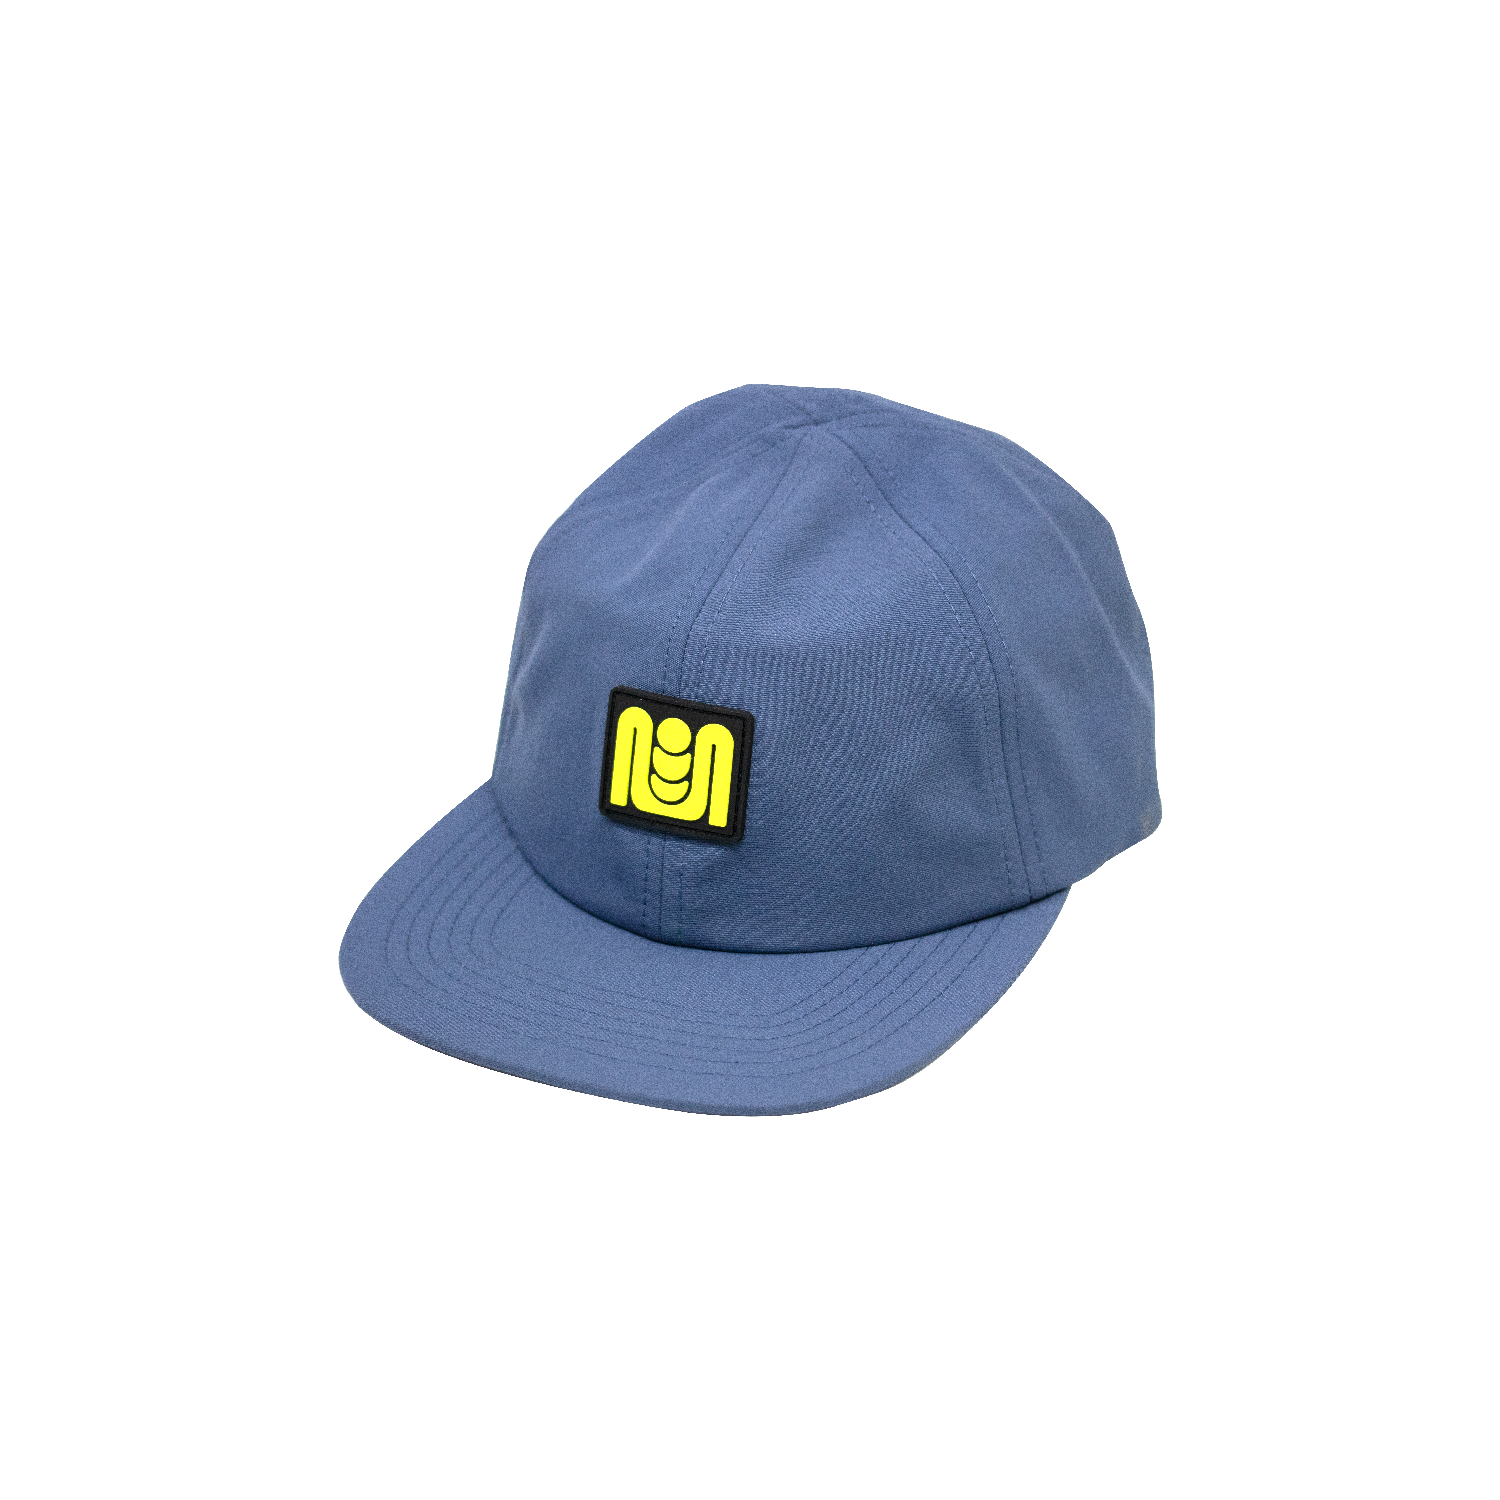 RUBBER CLASSIC LOGO HAT - TEAL BLUE